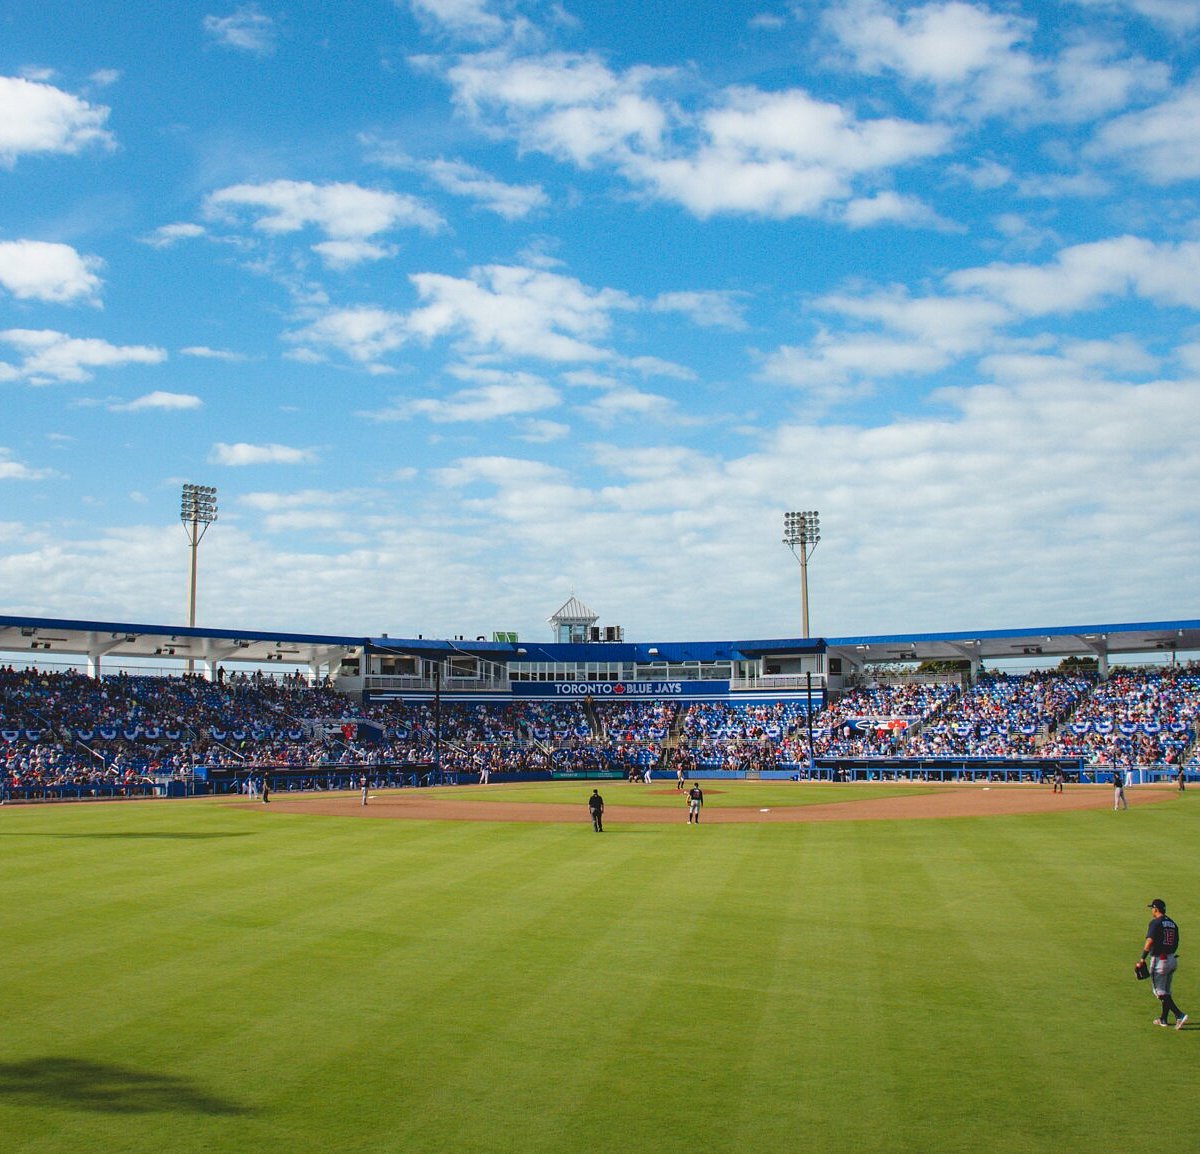 Fan's Guide to the Toronto Blue Jays Spring Training